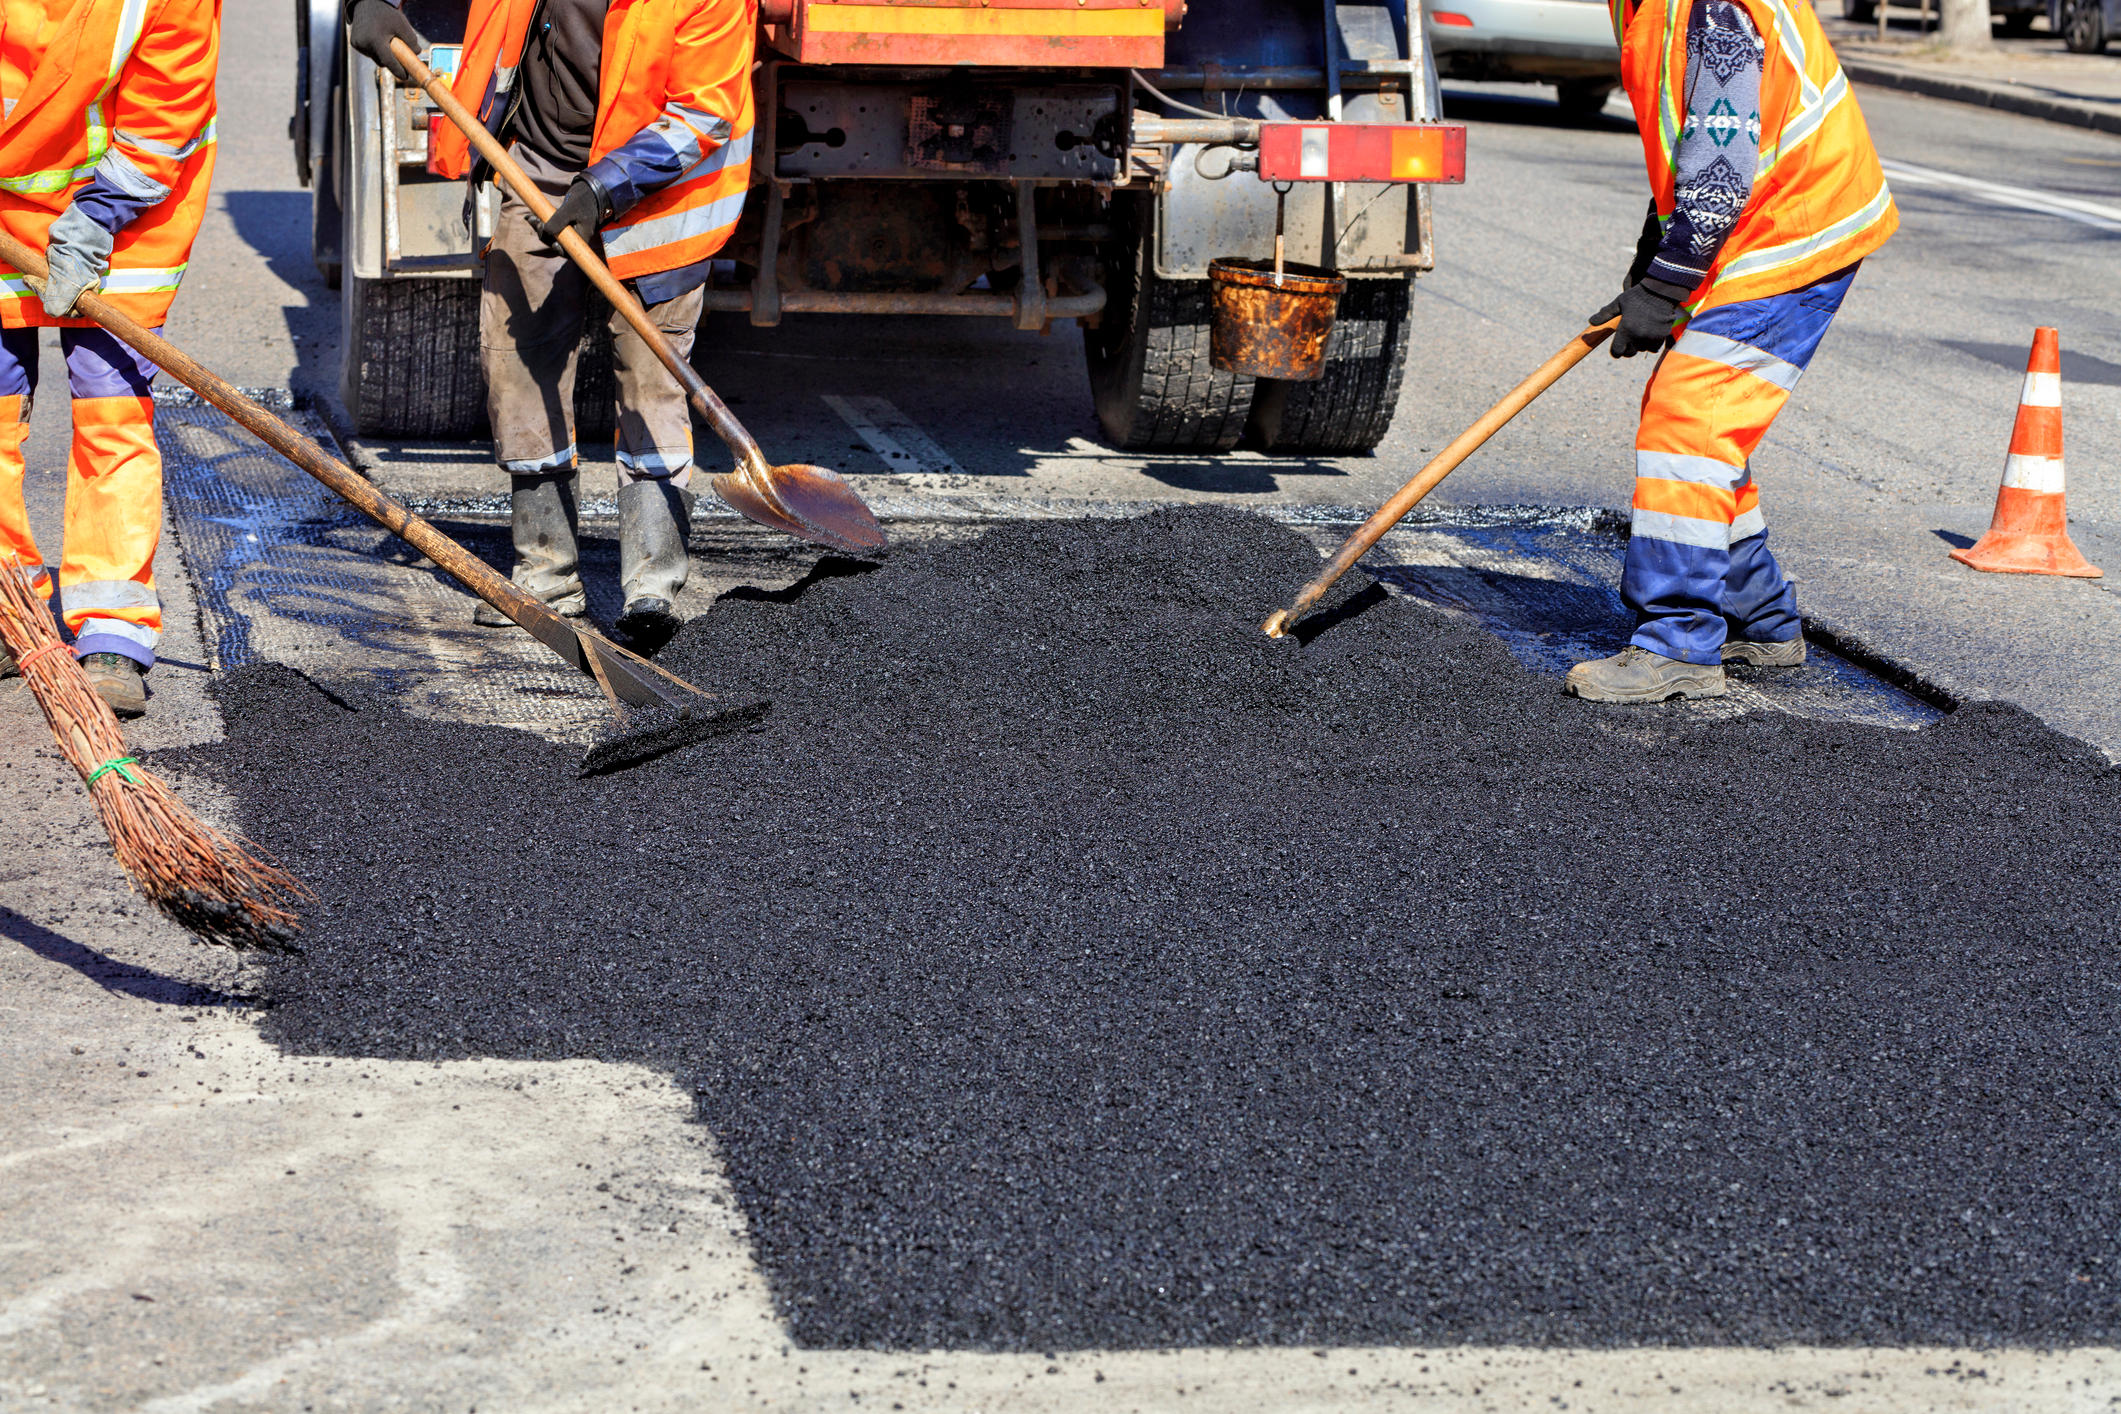 Whether your project involves repairing old asphalt pavement or maintaining newer surfaces, we've got you taken care of. Our professional team is experienced in a wide variety of asphalt repair and maintenance. Look no further for your Denver asphalt needs.